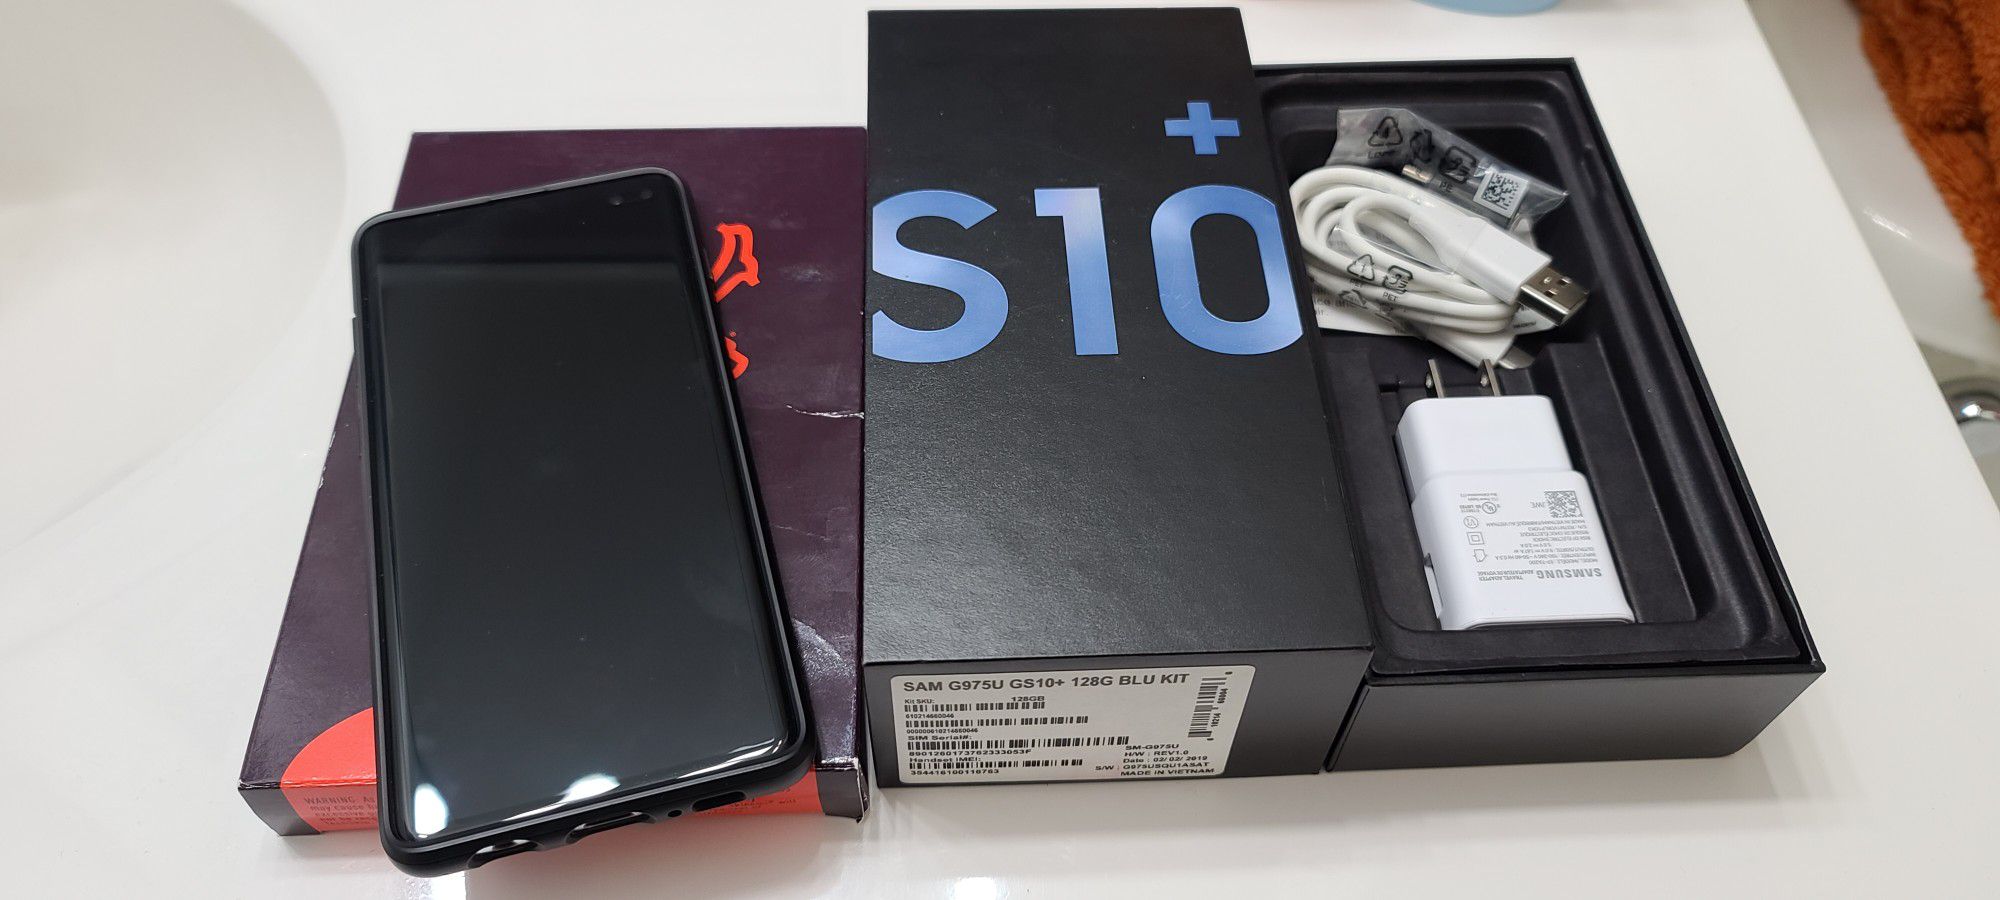 Samsung Galaxy S10+ (Plus) . T-mobile . 128GB . Spigen Case . Charger . Screen Protector